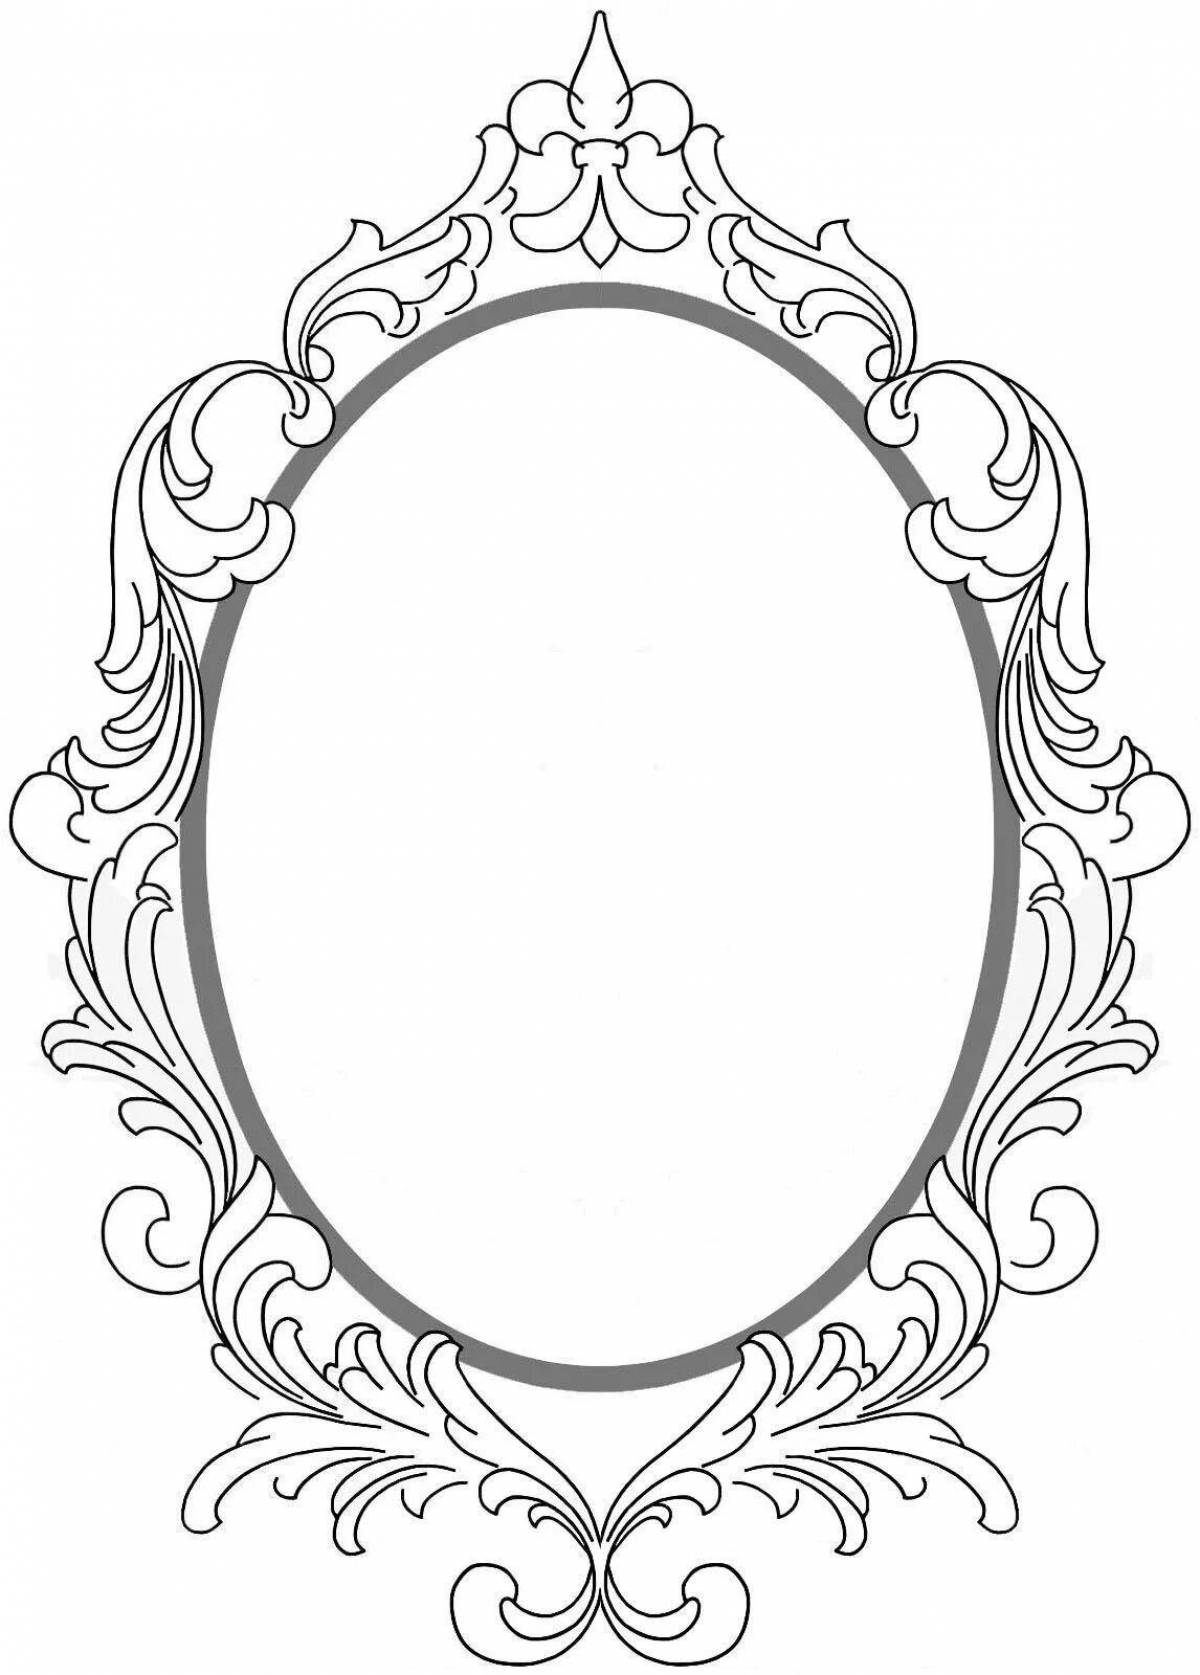 Shining mirror coloring page